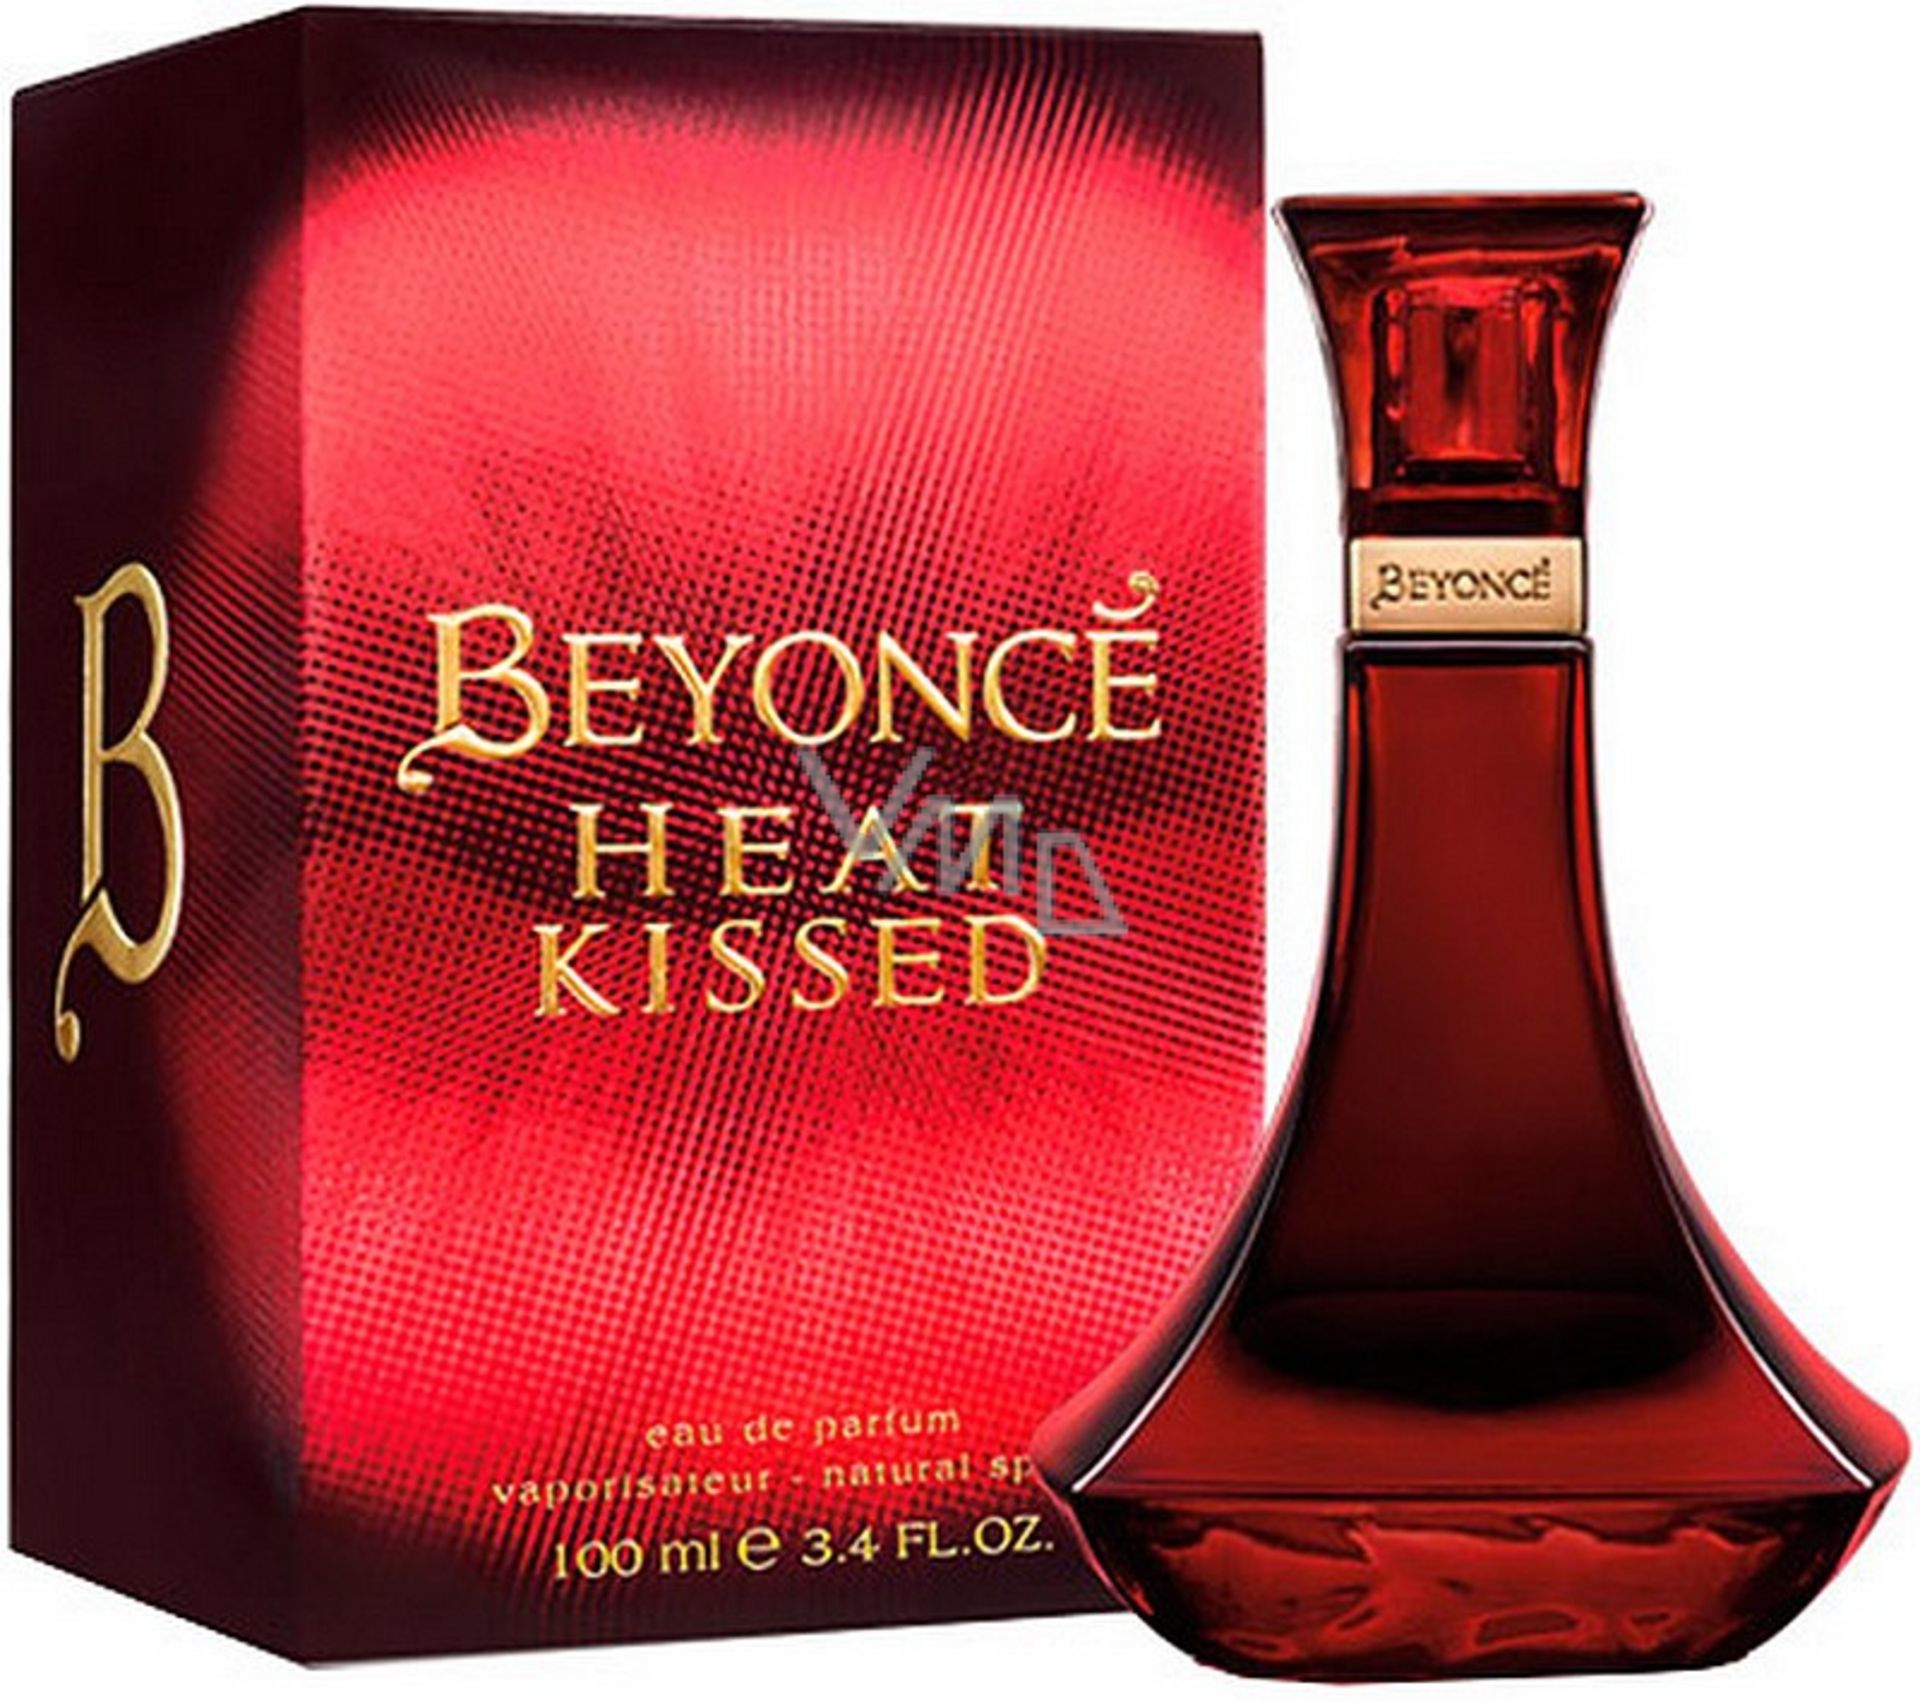 V Brand New Beyonce Heat Kissed 100 ml EDP. Boots.Com £19.97 X 2 YOUR BID PRICE TO BE MULTIPLIED